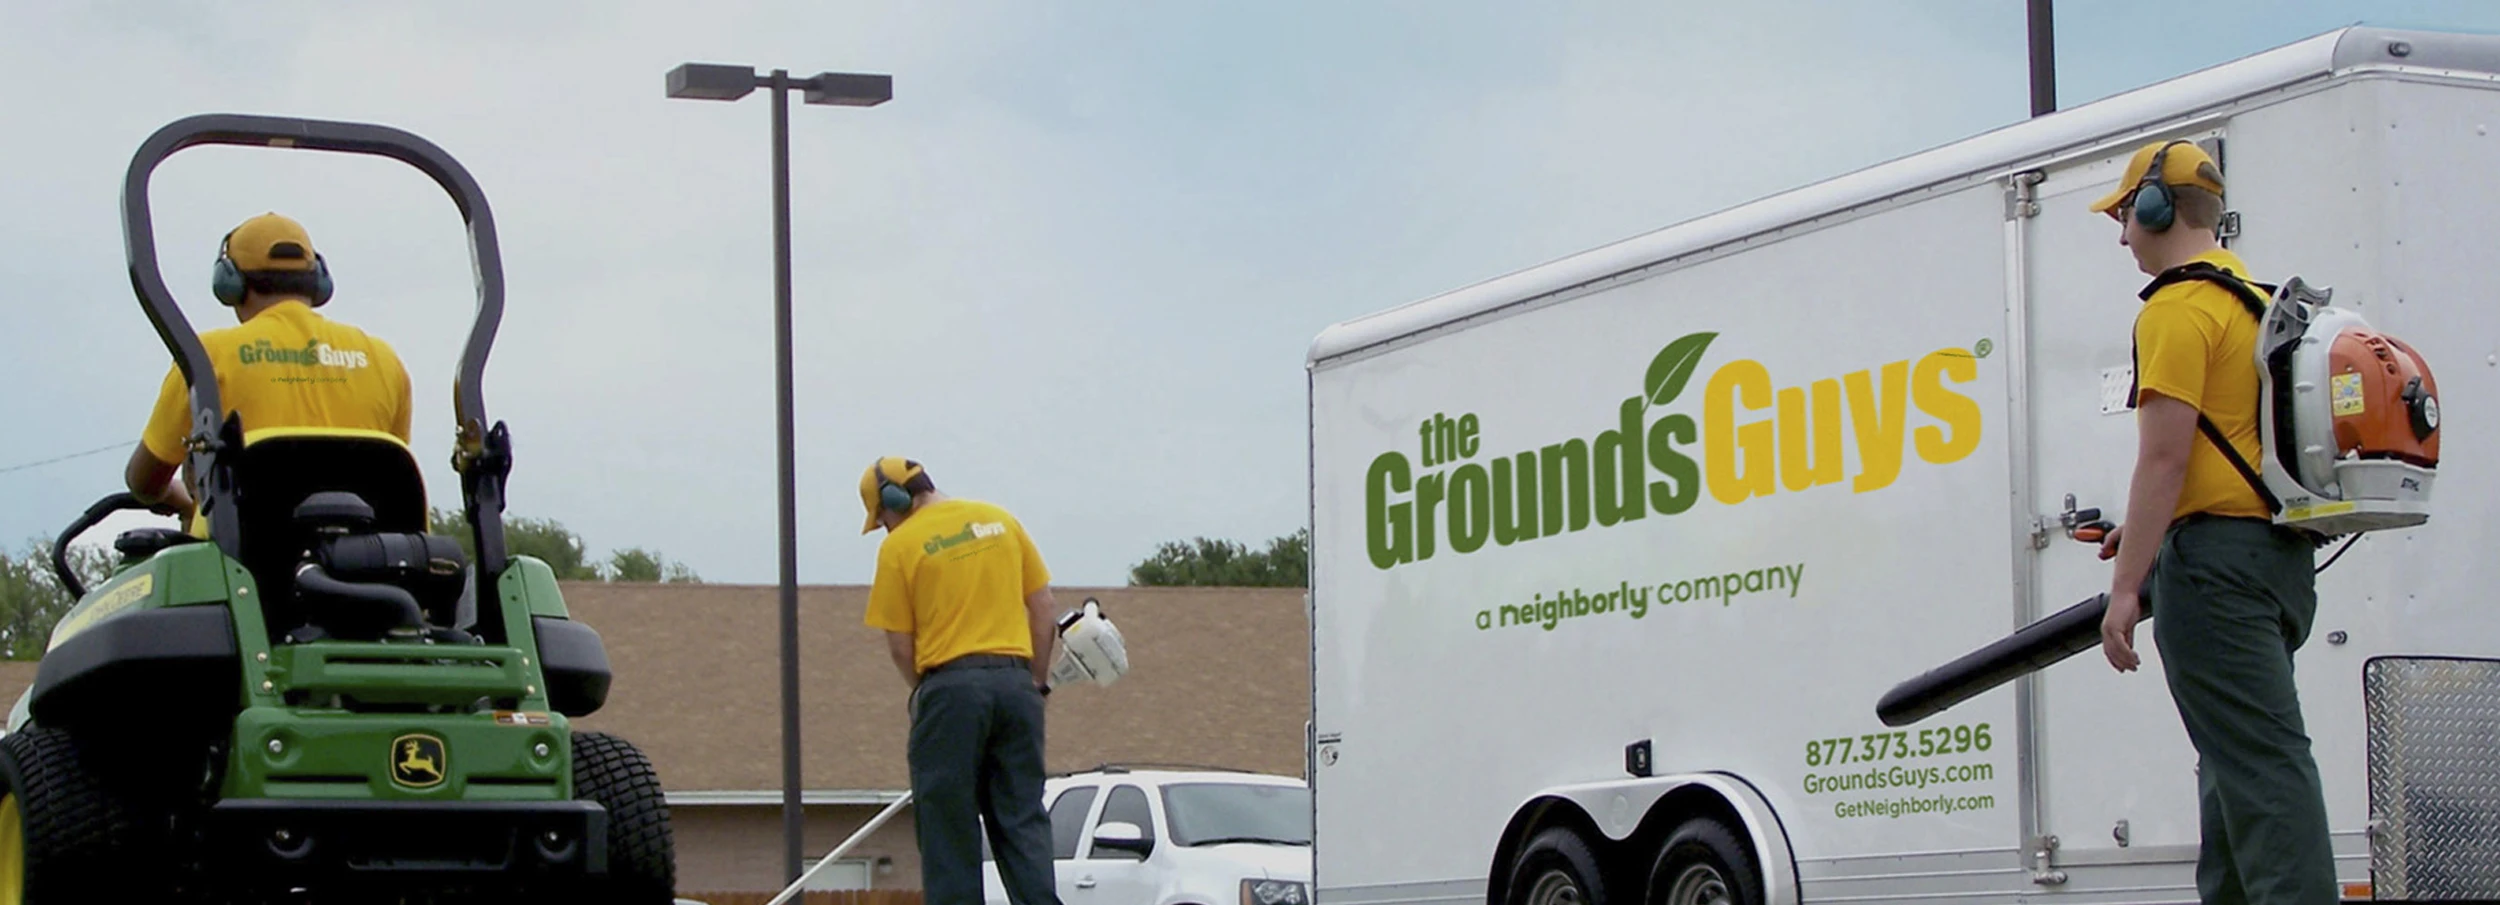 Three Grounds Guys associates performing lawn cleanup next to a white trailer displaying The Grounds Guys logo.